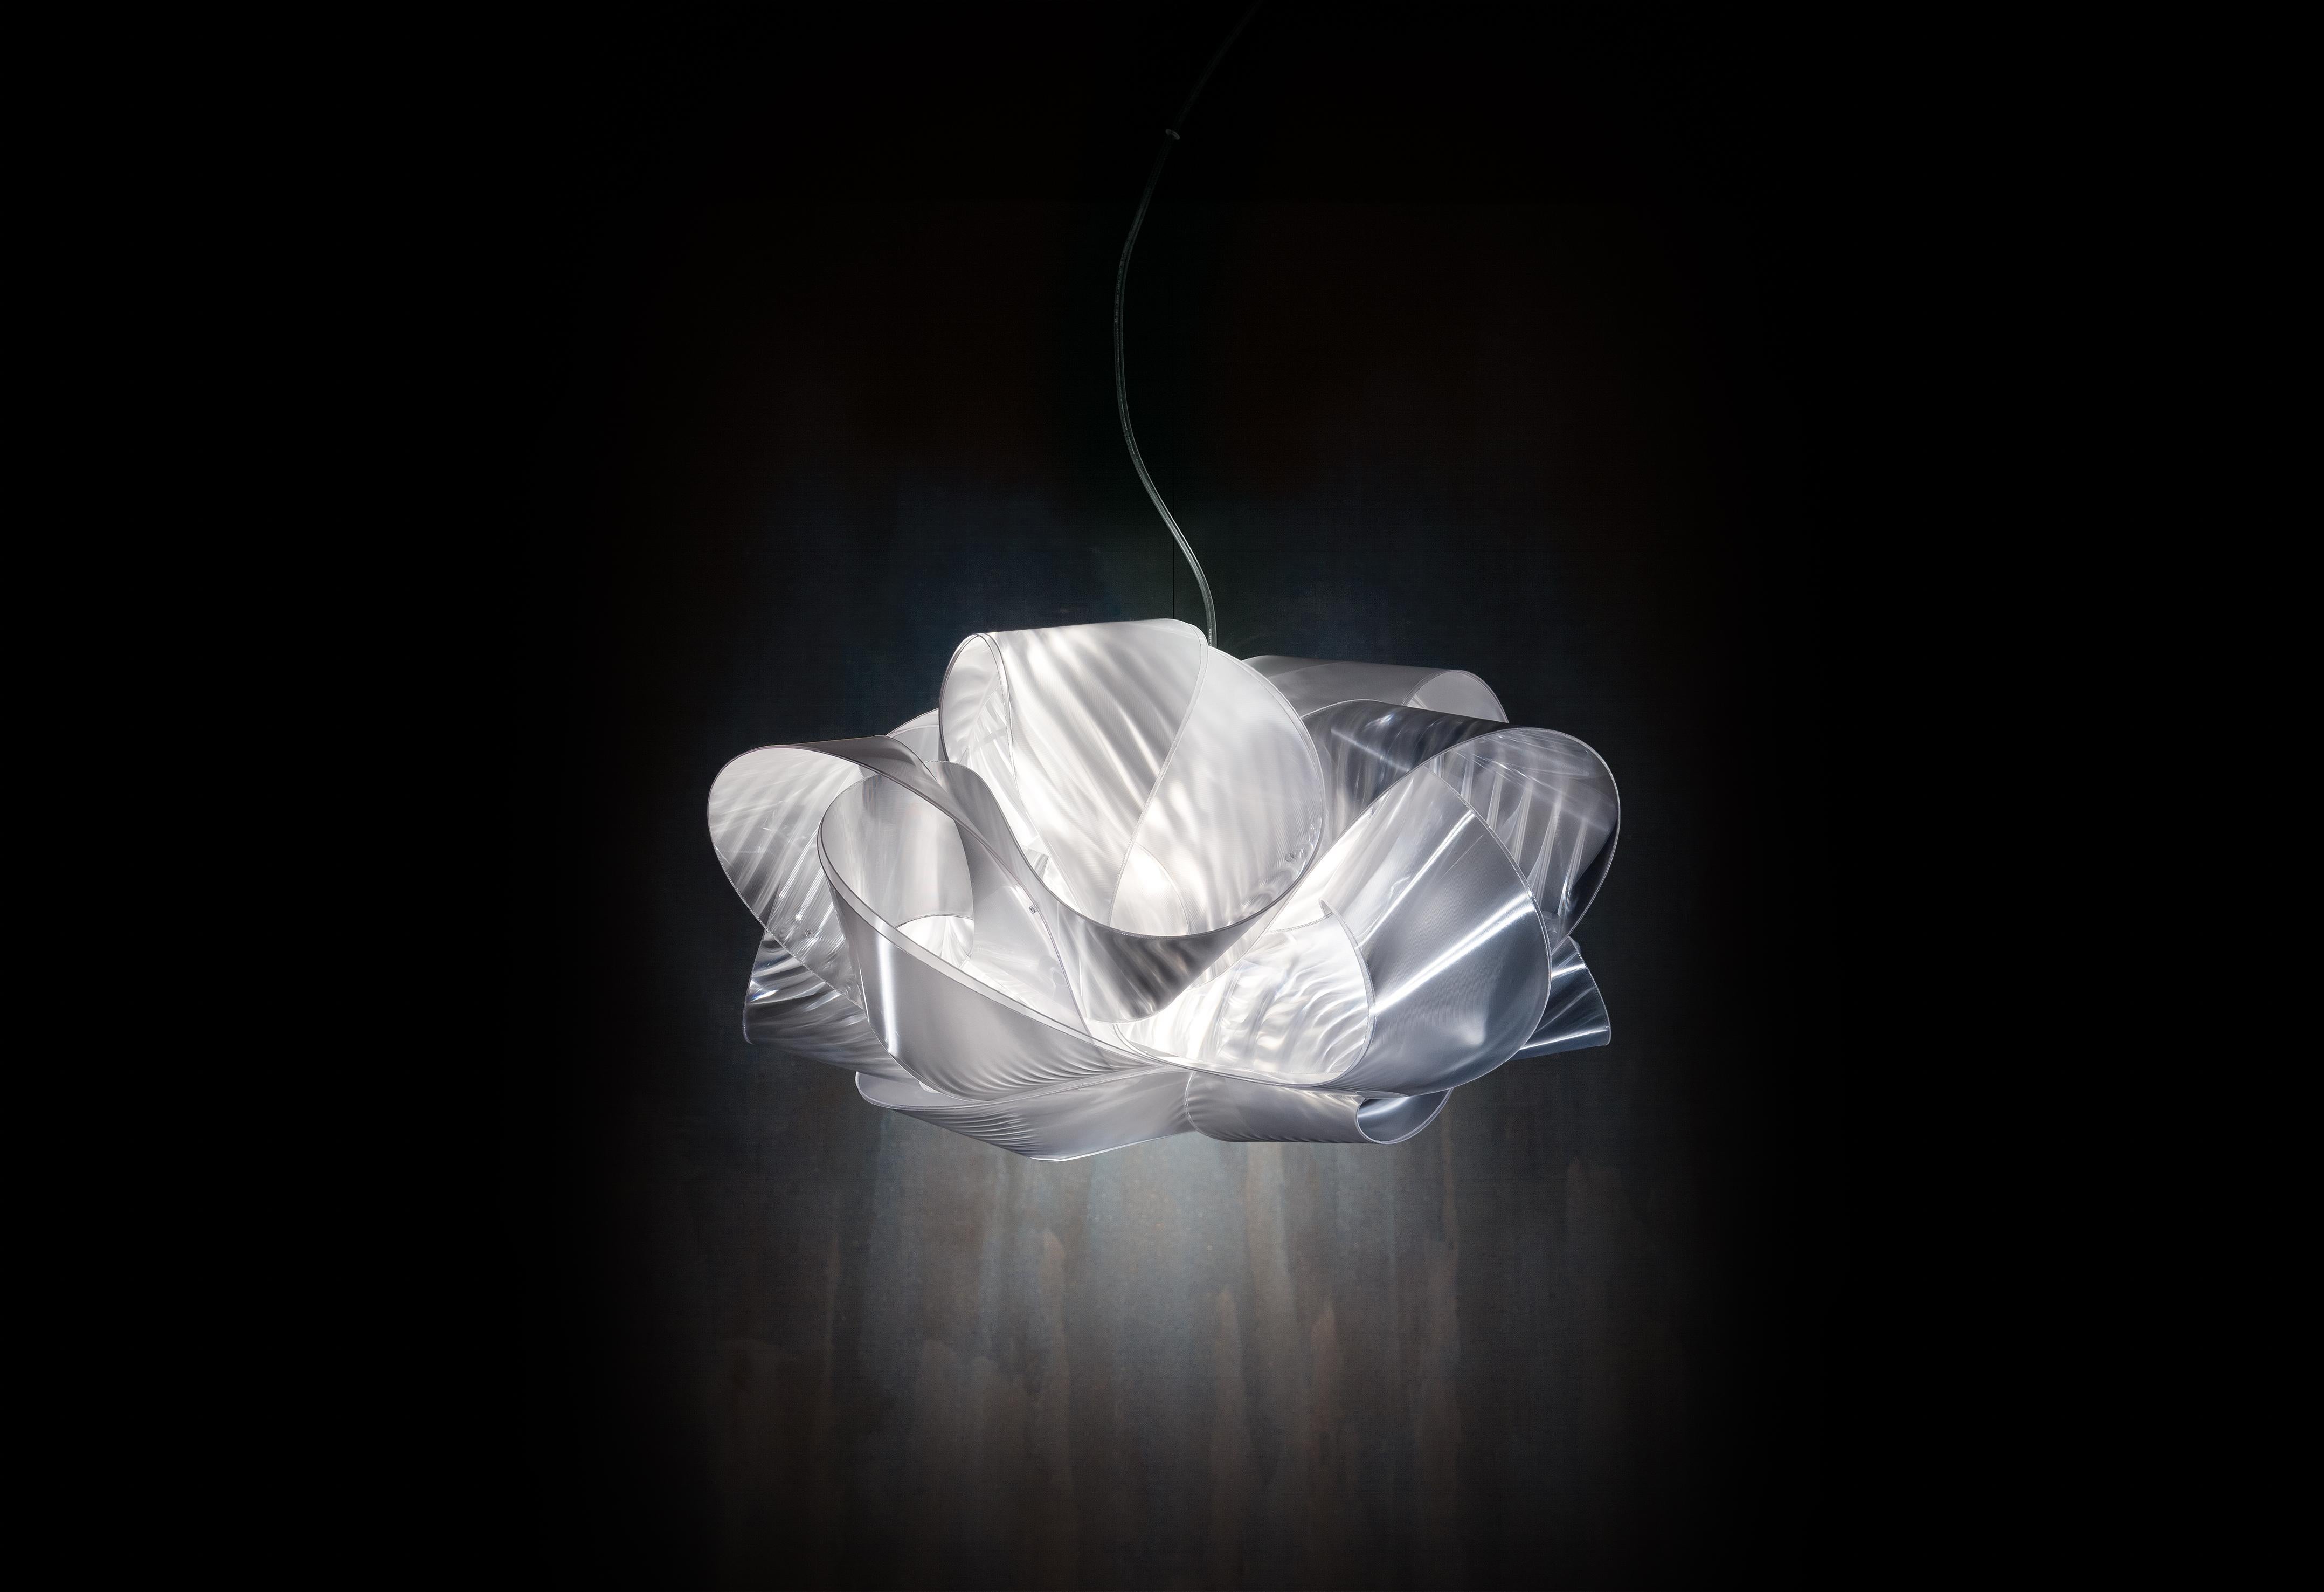 Fabula appears to be a long, silky piece of fabric wound around itself. The new, iridescent versions for ceiling and wall are 60 cm in diameter, handmade with Lentiflex®, and feature 5 light sources that make it perfect for illuminating large